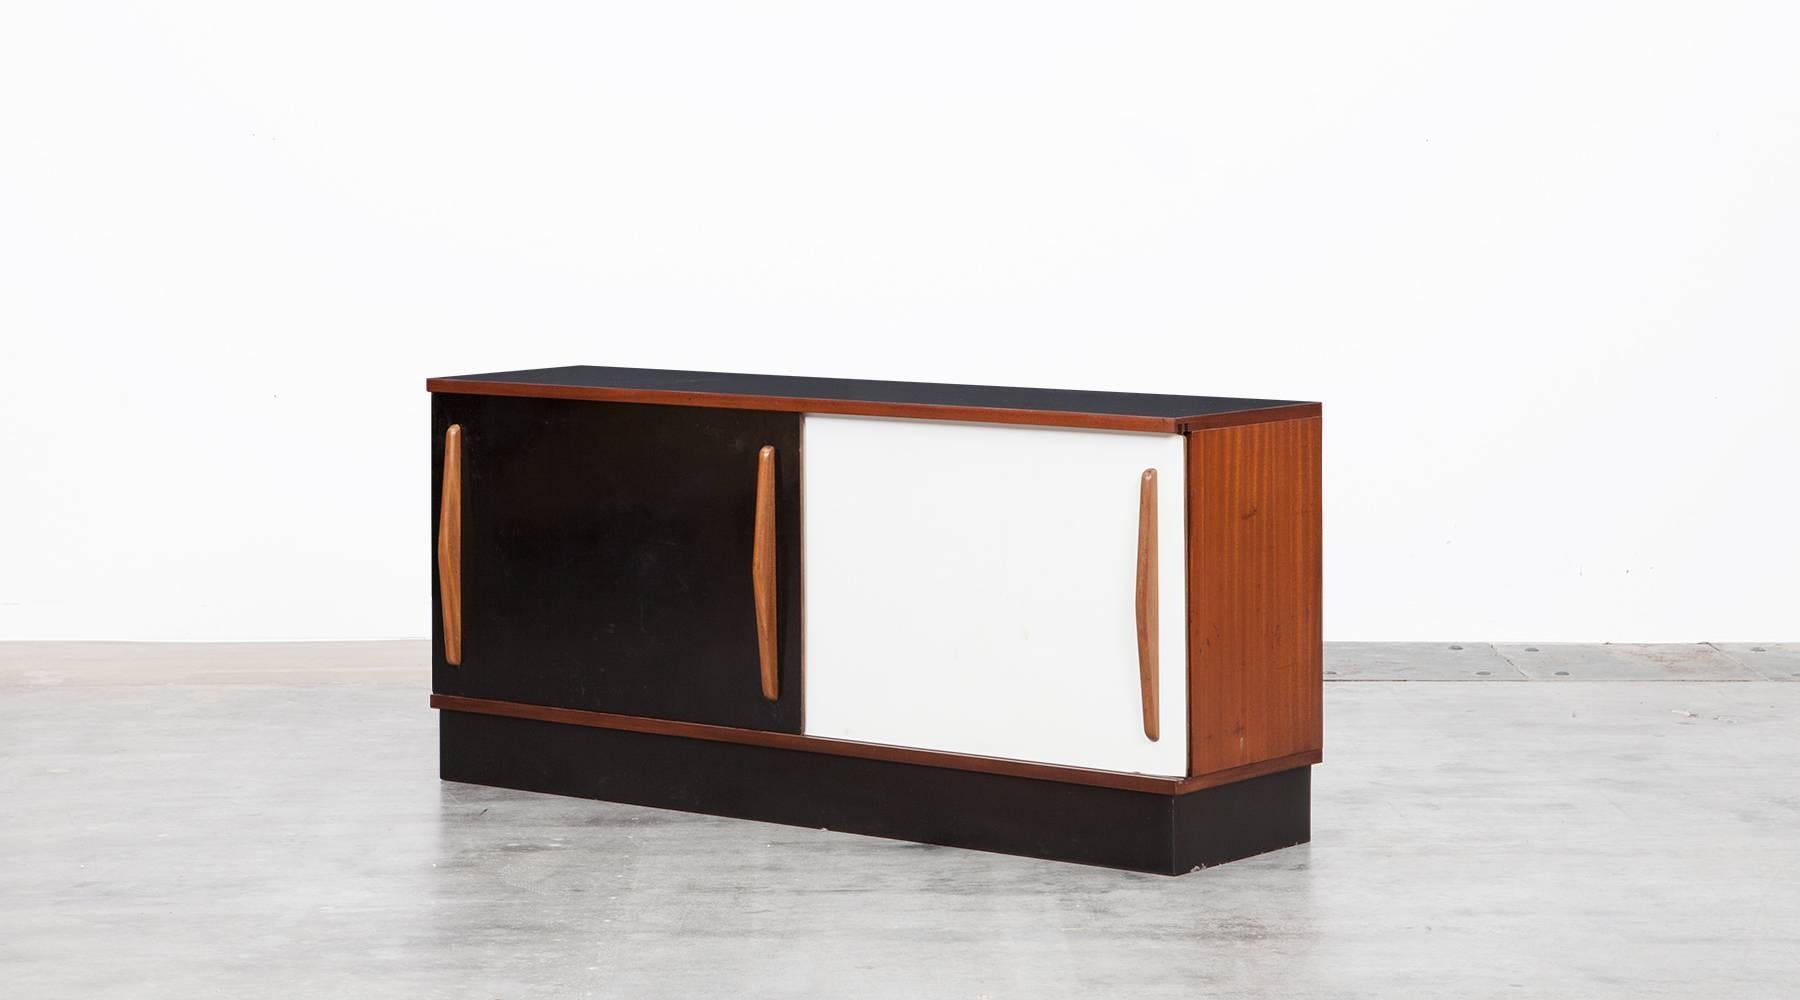 Beautiful and really rare Charlotte Perriand sideboard edited by Steph Simon. This piece is made out of mahogany and comes with two shelves and two laminate sliding doors in black and white. The sideboard is in very good original condition with